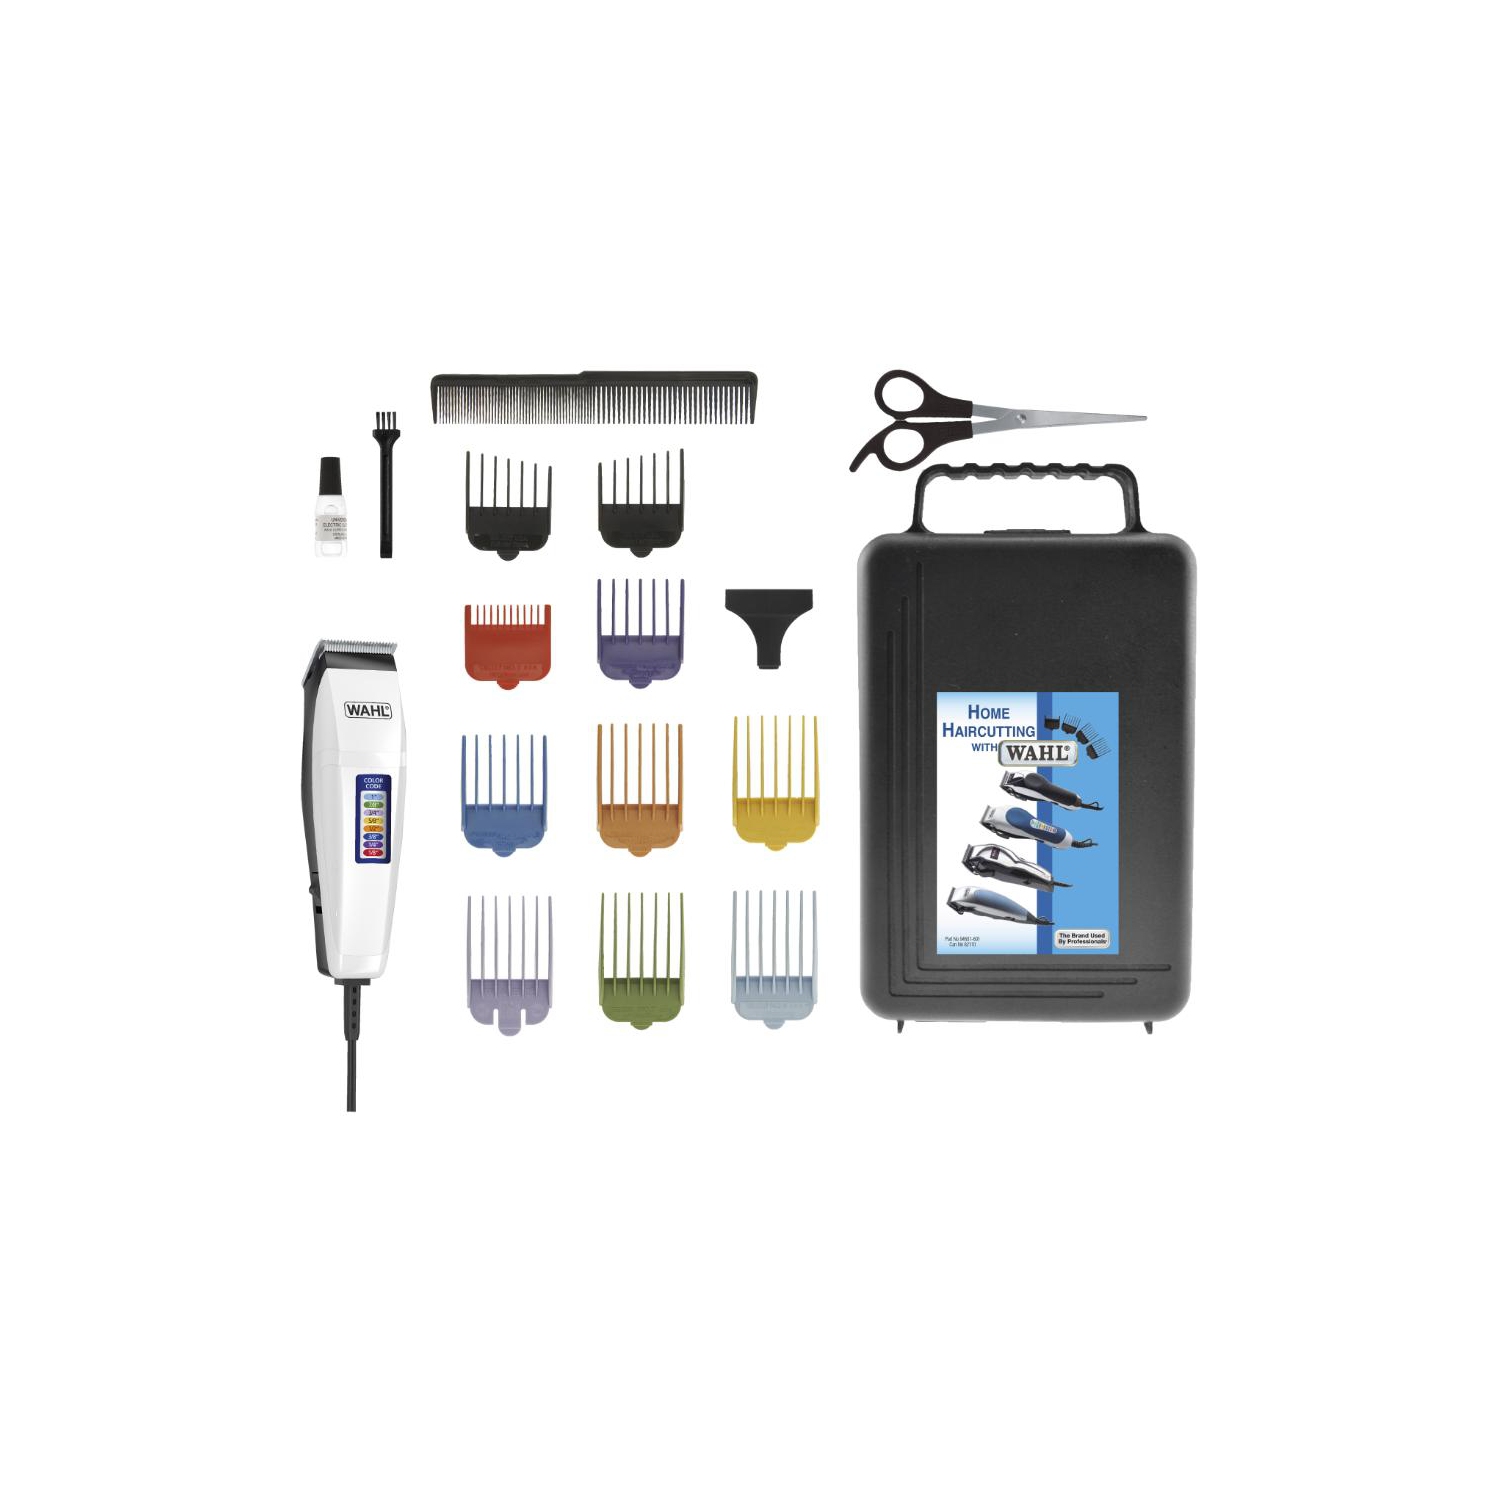 WAHL - 17 Pieces Hair Clipper and Accessories Set, White